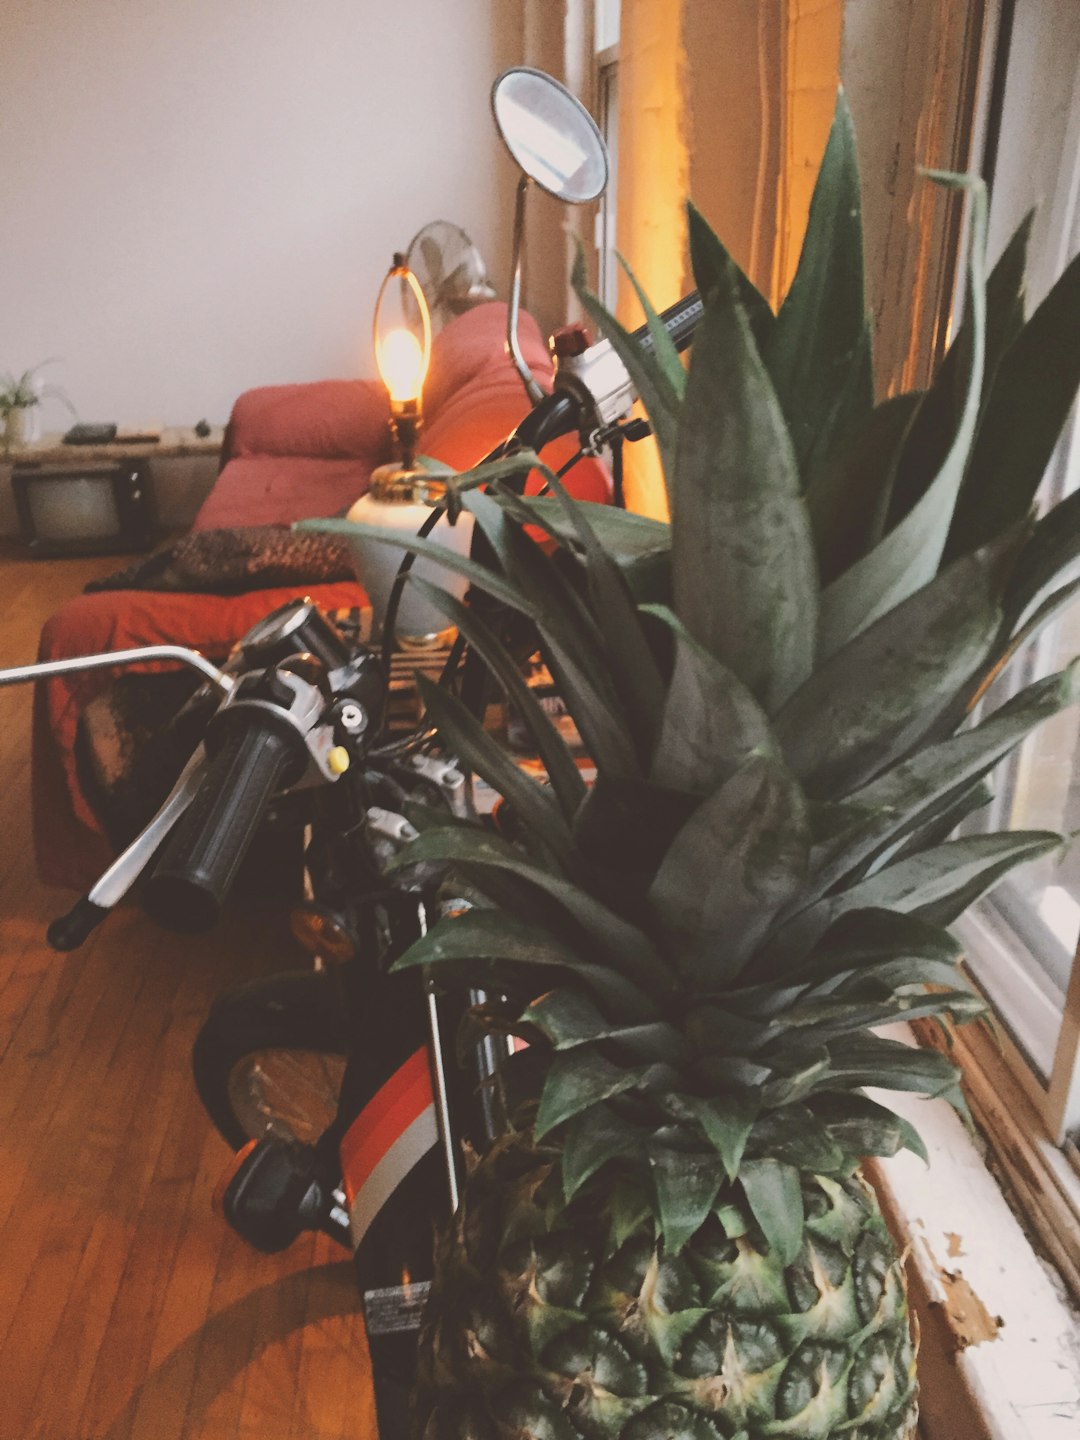 Pineapple Photo for Free on a Motorcycle in Loft